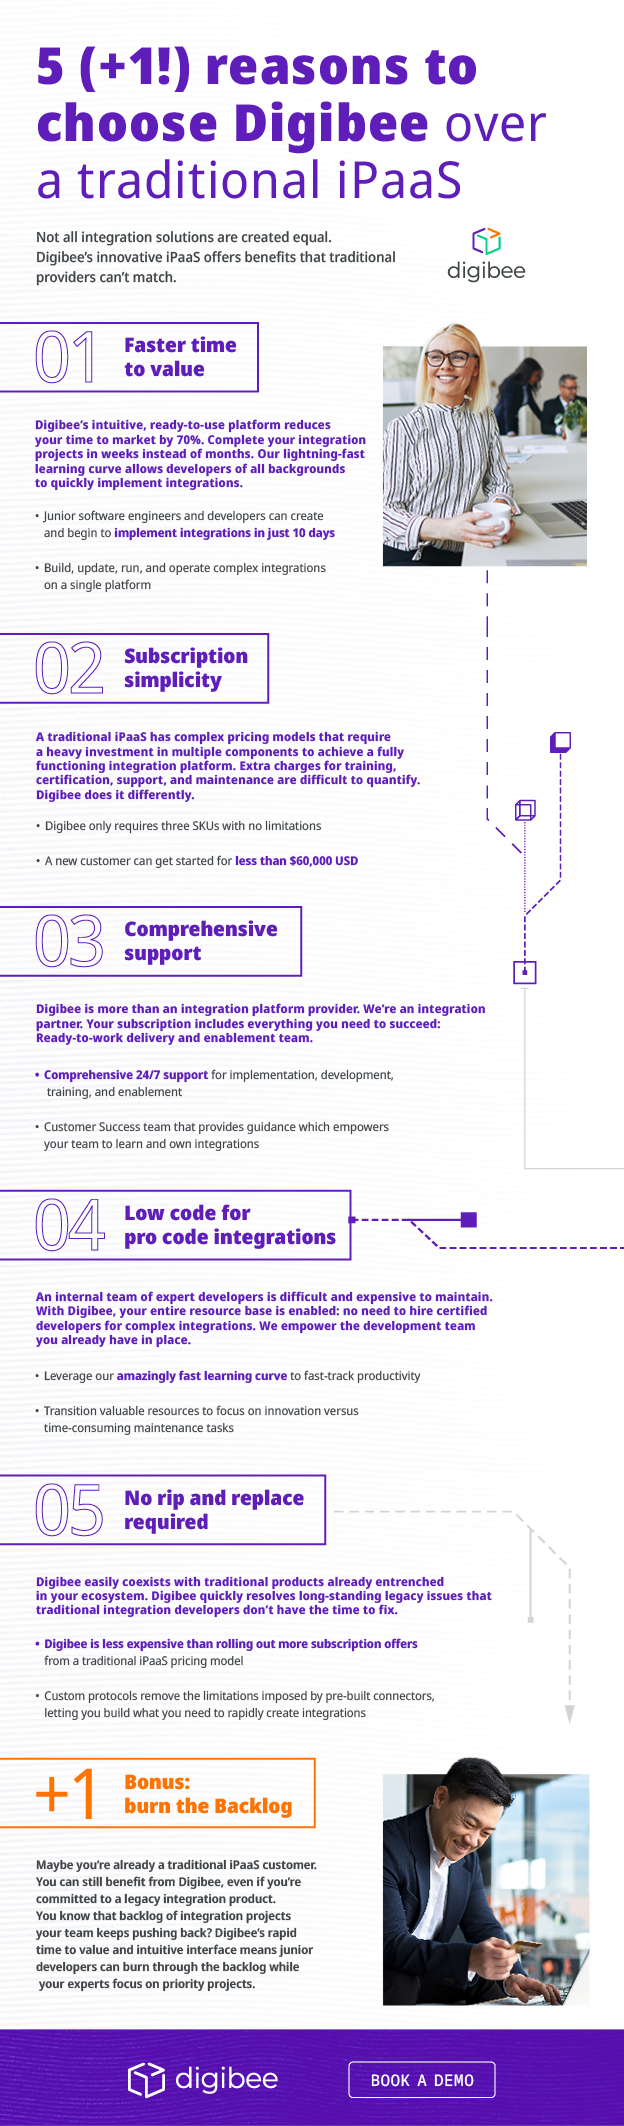 infographic-5+1-reasons-to-choose-Digibee